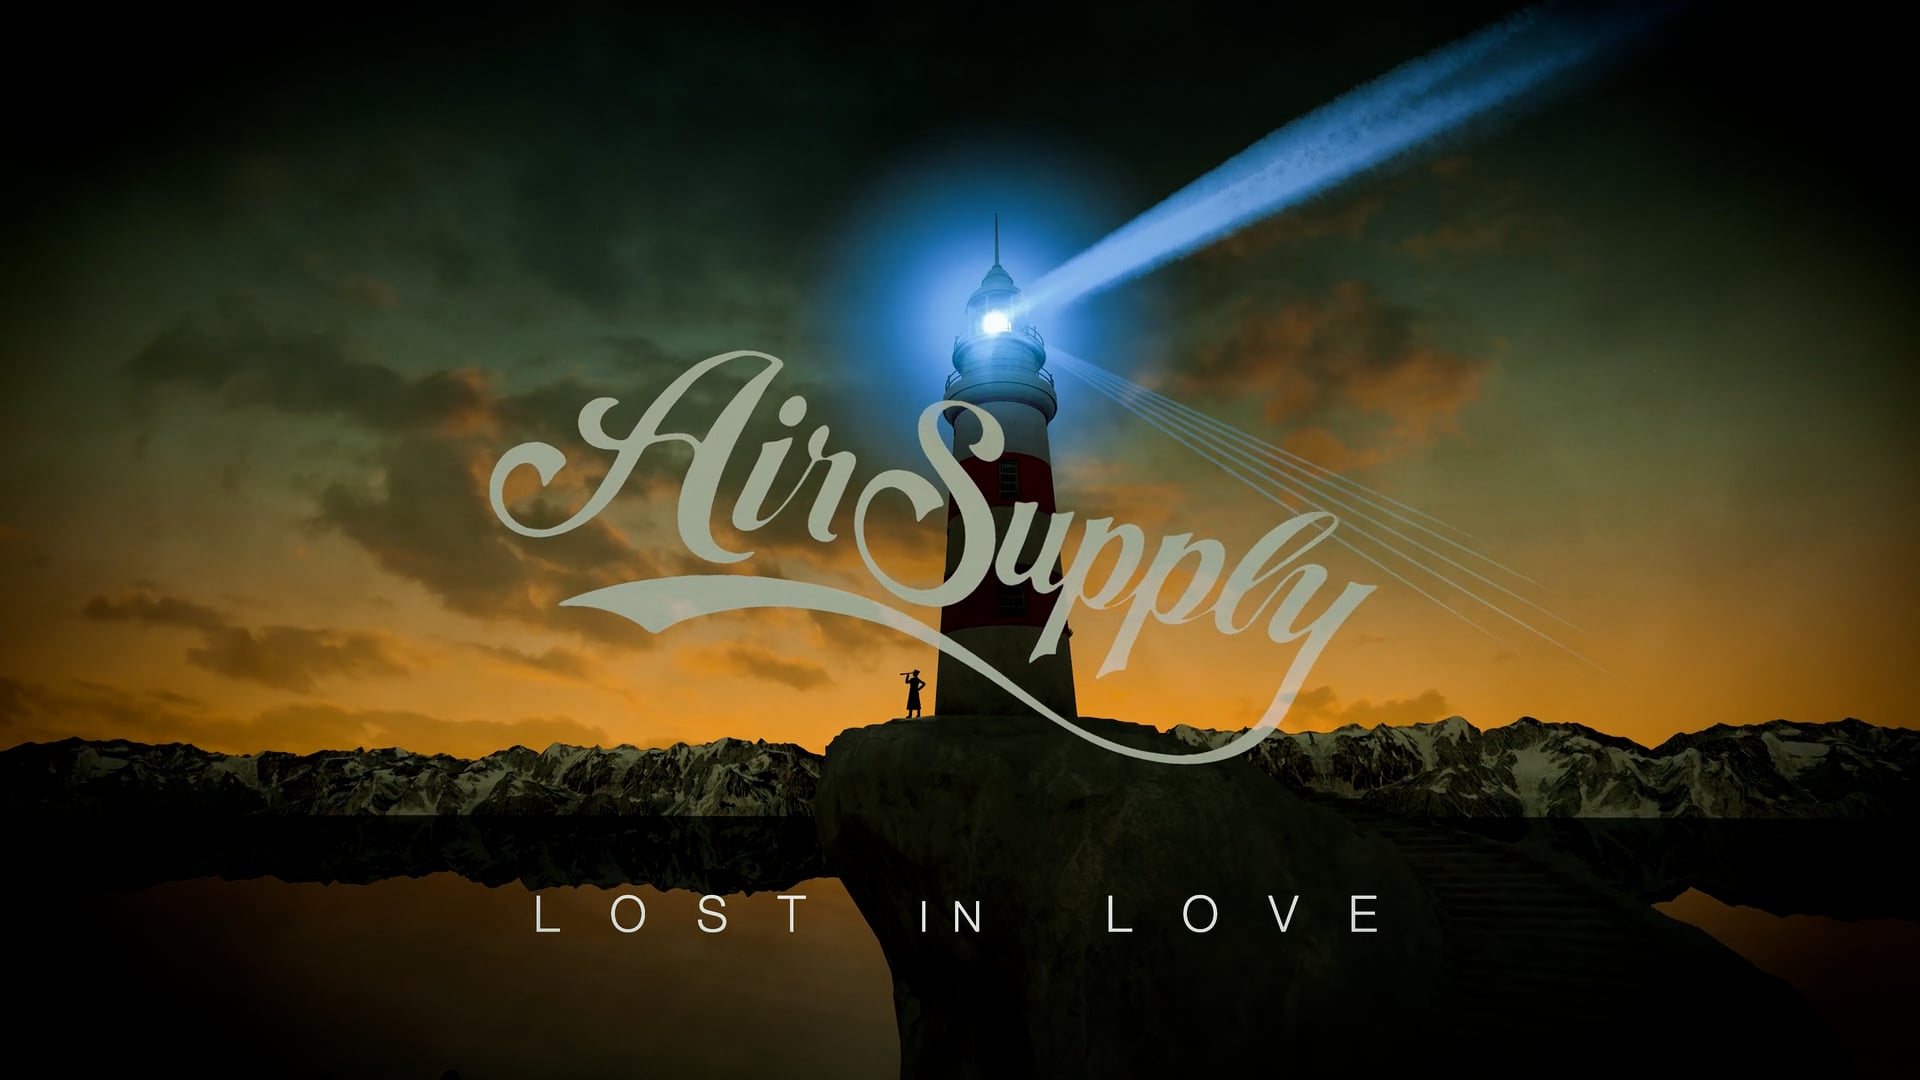 Air Supply "Lost in Love"